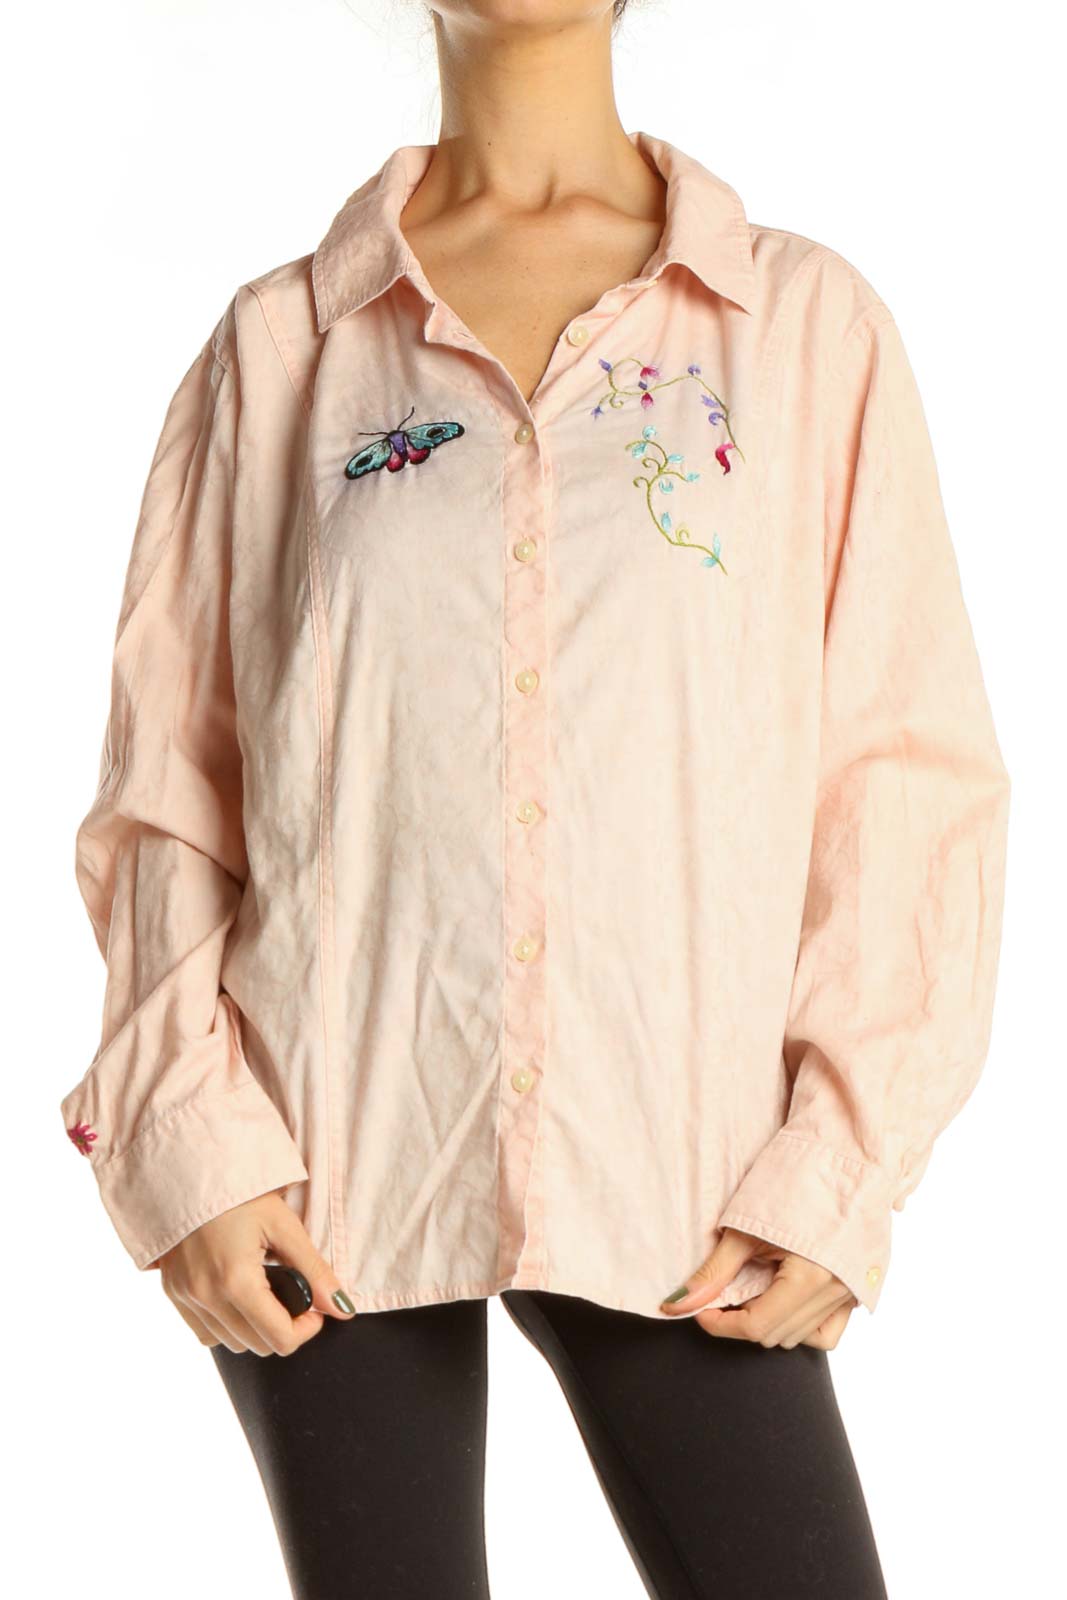 Reworked: Pink Hand Embroidered Shirt with Butterfly and Floral Details Front